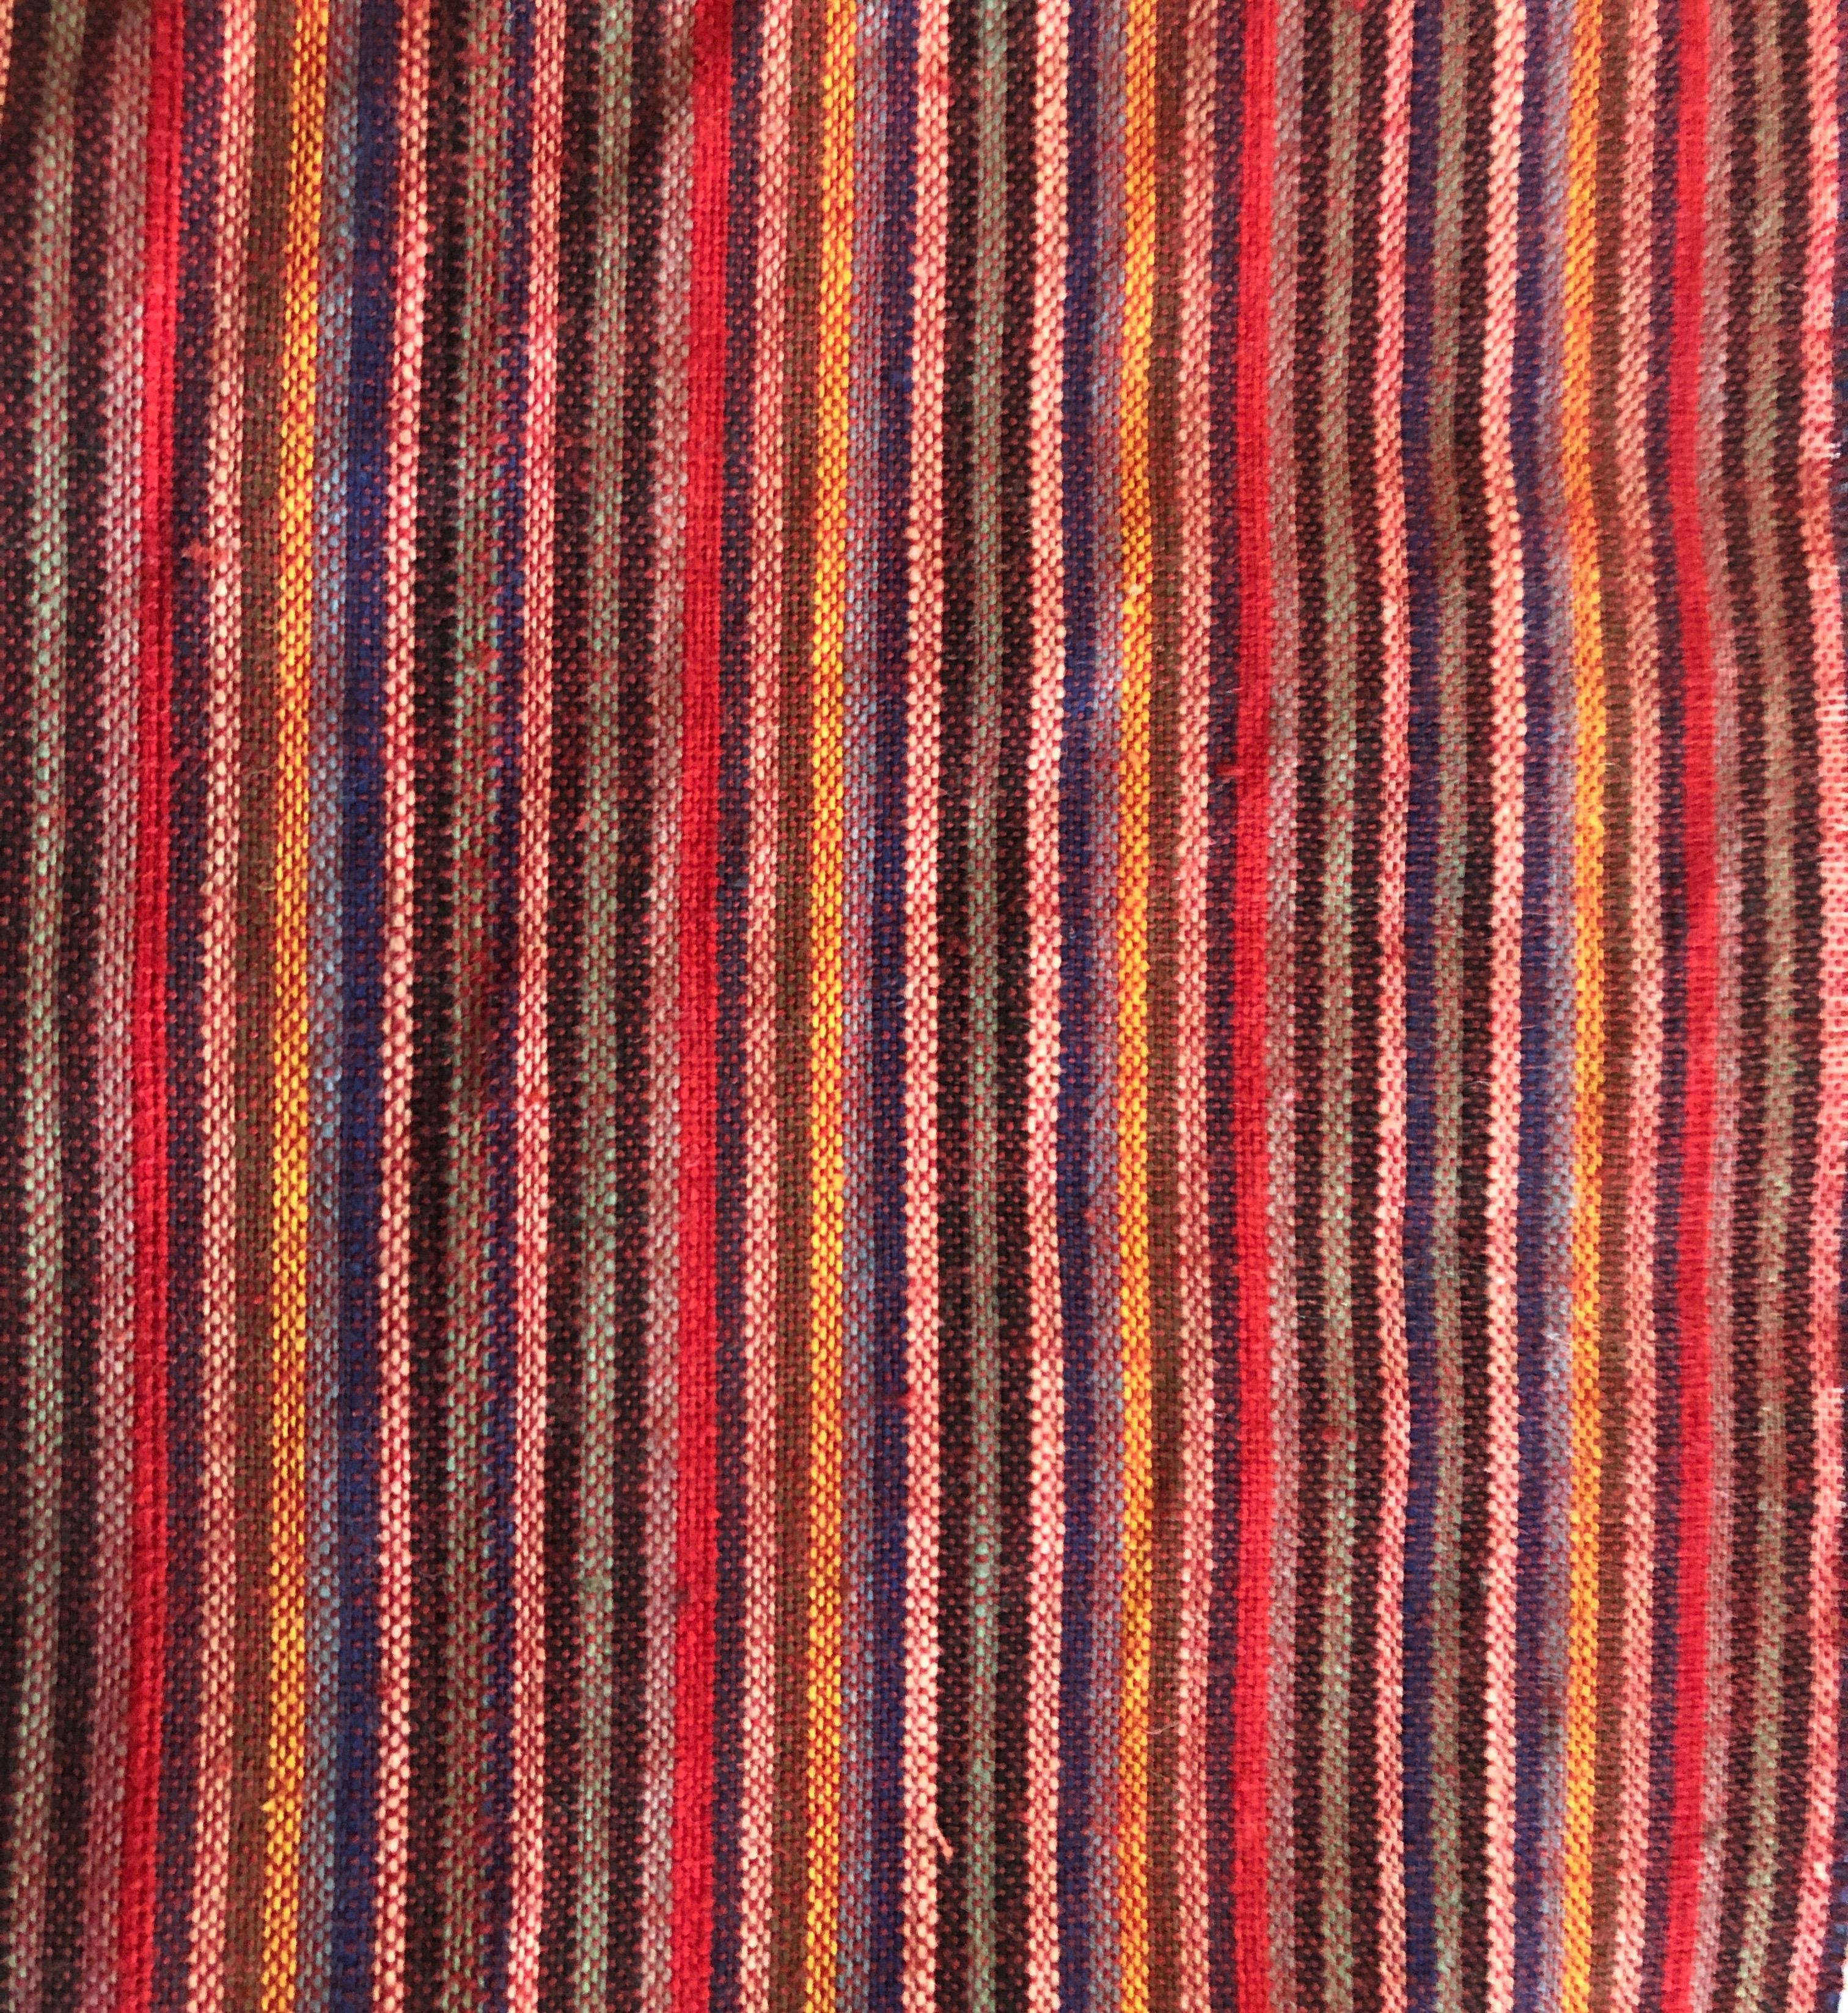 Vintage multi-color stripe Turkish trim or ribbon.
Ideal for pillows or upholstery.
Size: 5.5